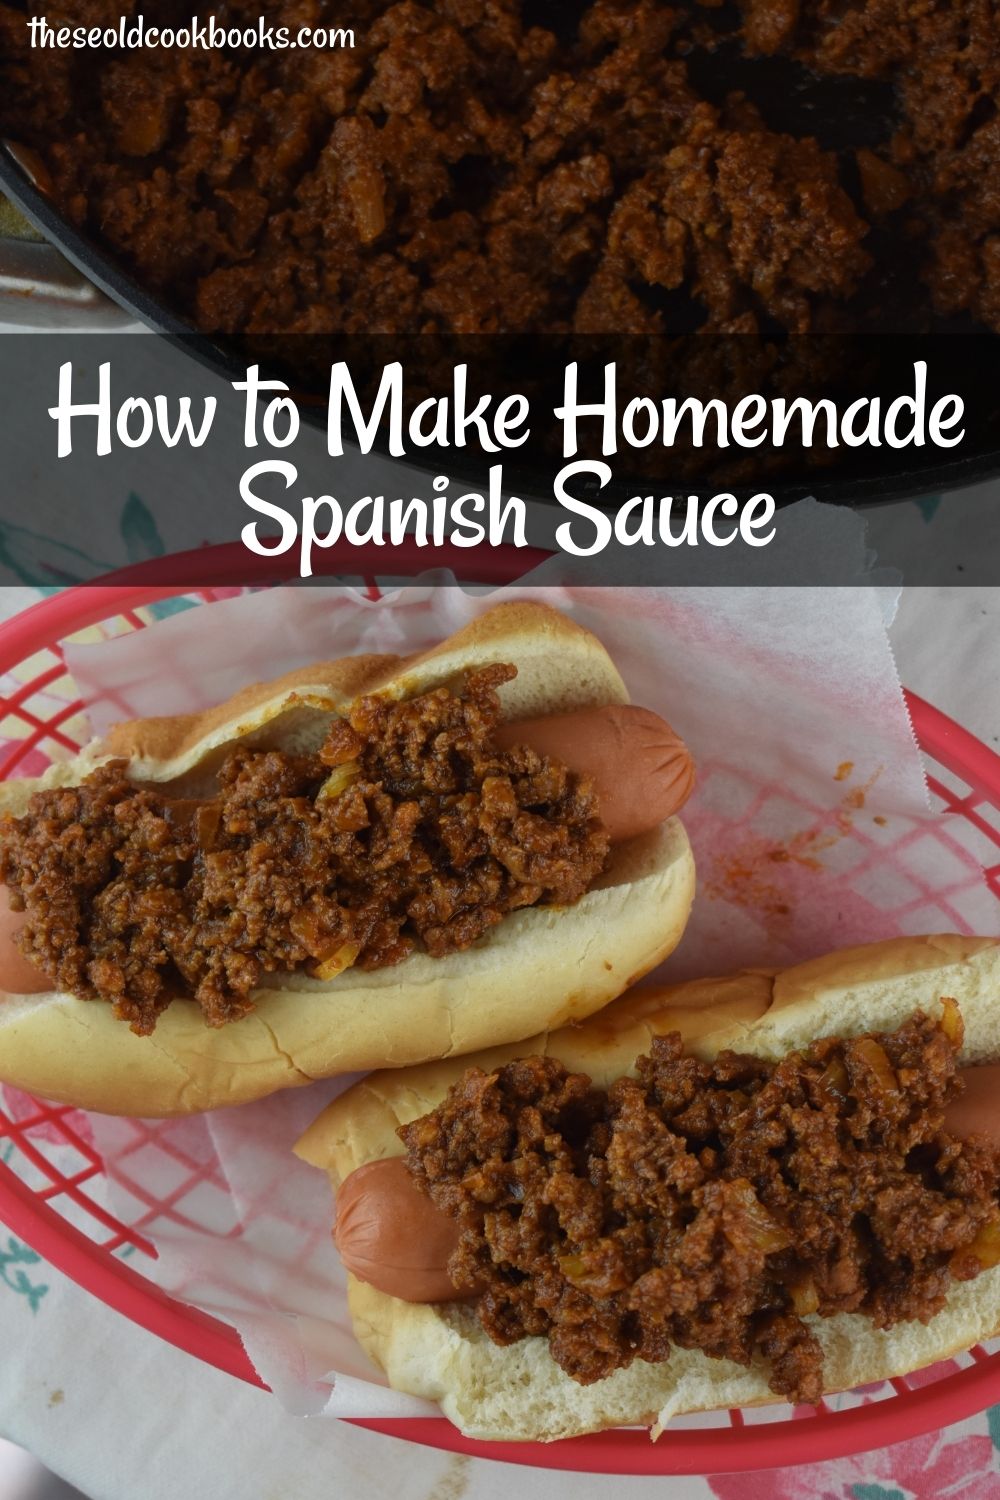 Whether you call it Coney sauce, chili sauce or Spanish Hot Dog Sauce, it's a cult favorite that takes you right back to your childhood. This restaurant-style hot dog sauce has the perfect amount of spice to top off your favorite dog!